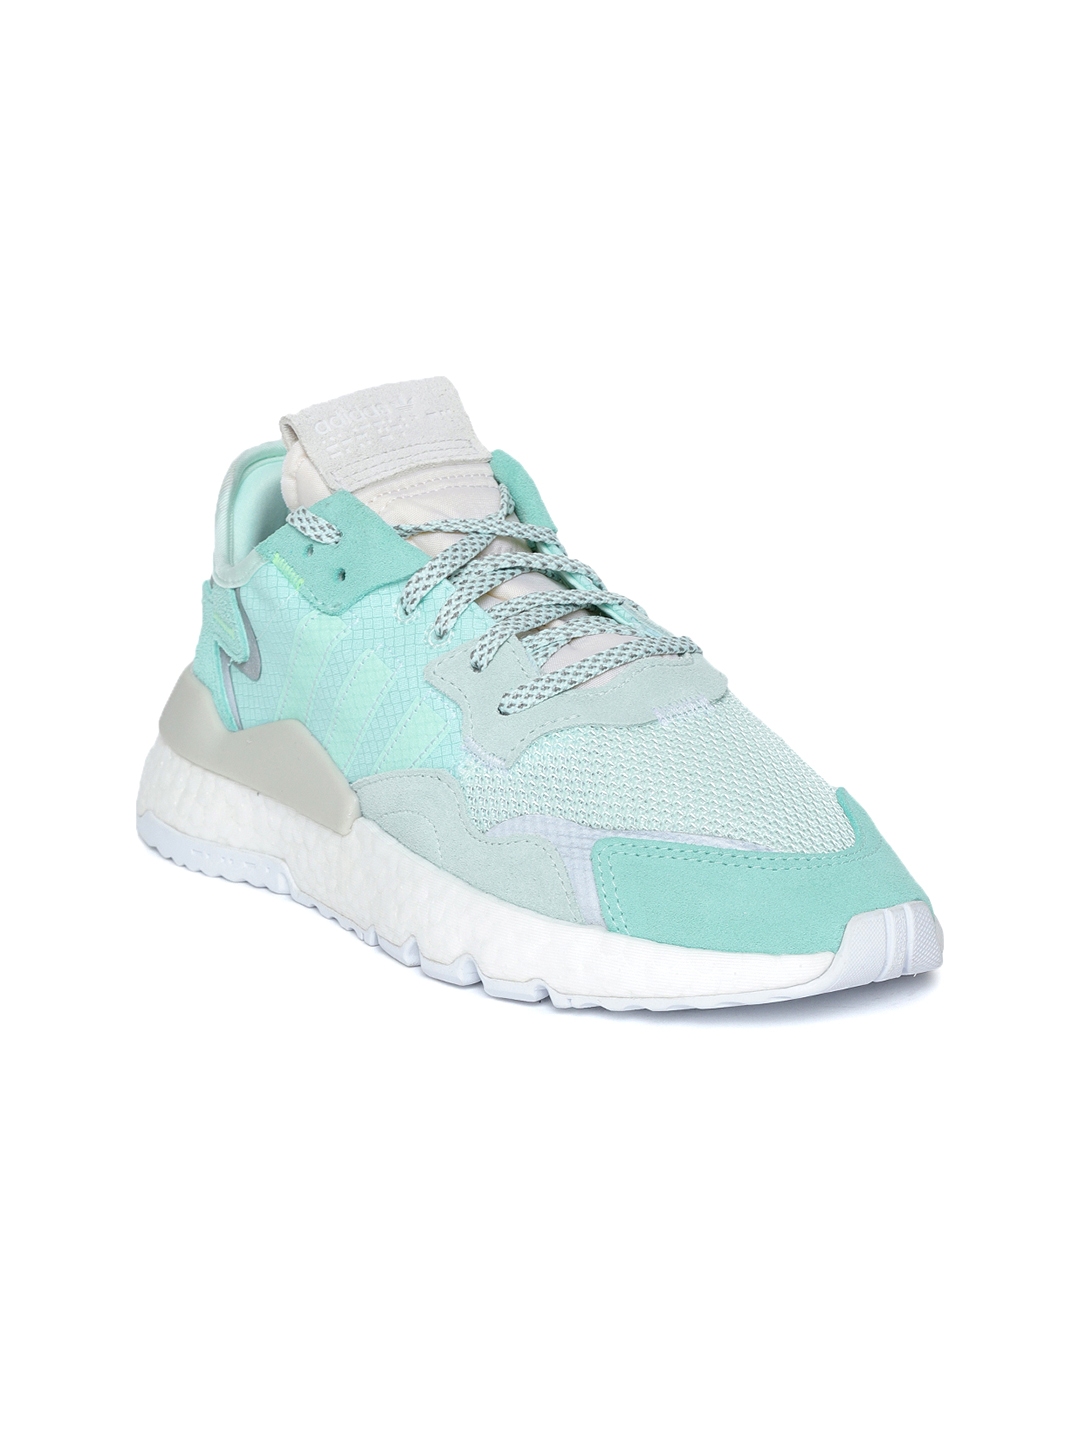 adidas shoes mint green